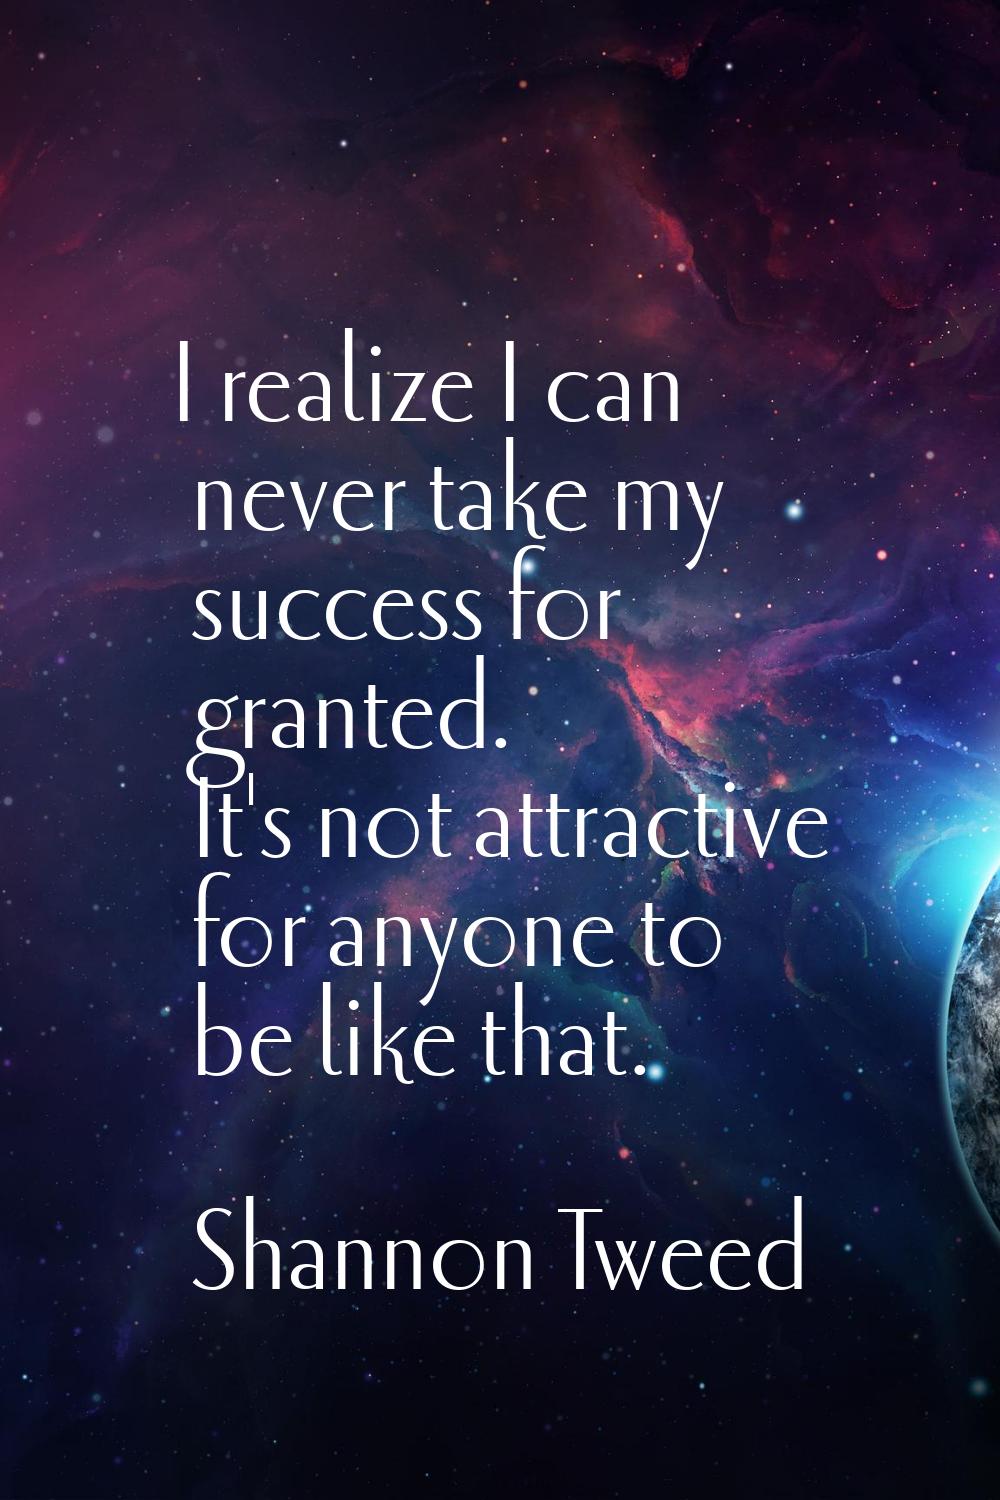 I realize I can never take my success for granted. It's not attractive for anyone to be like that.